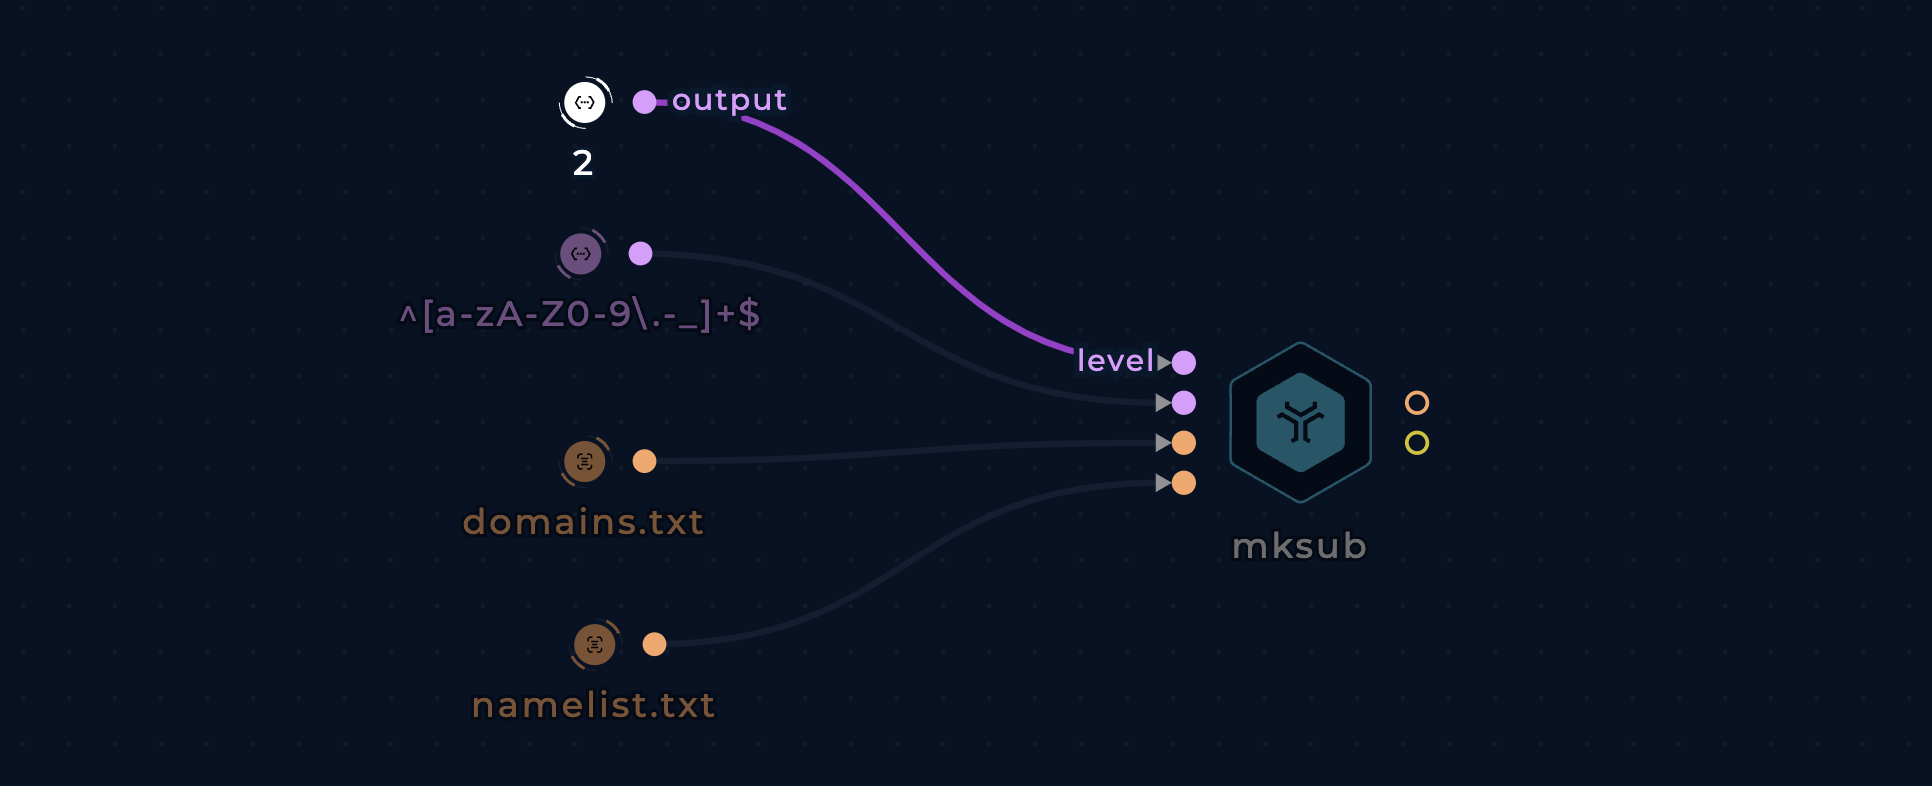 Screenshot of the mksub node connected to four input nodes on the left side in the workflow editor